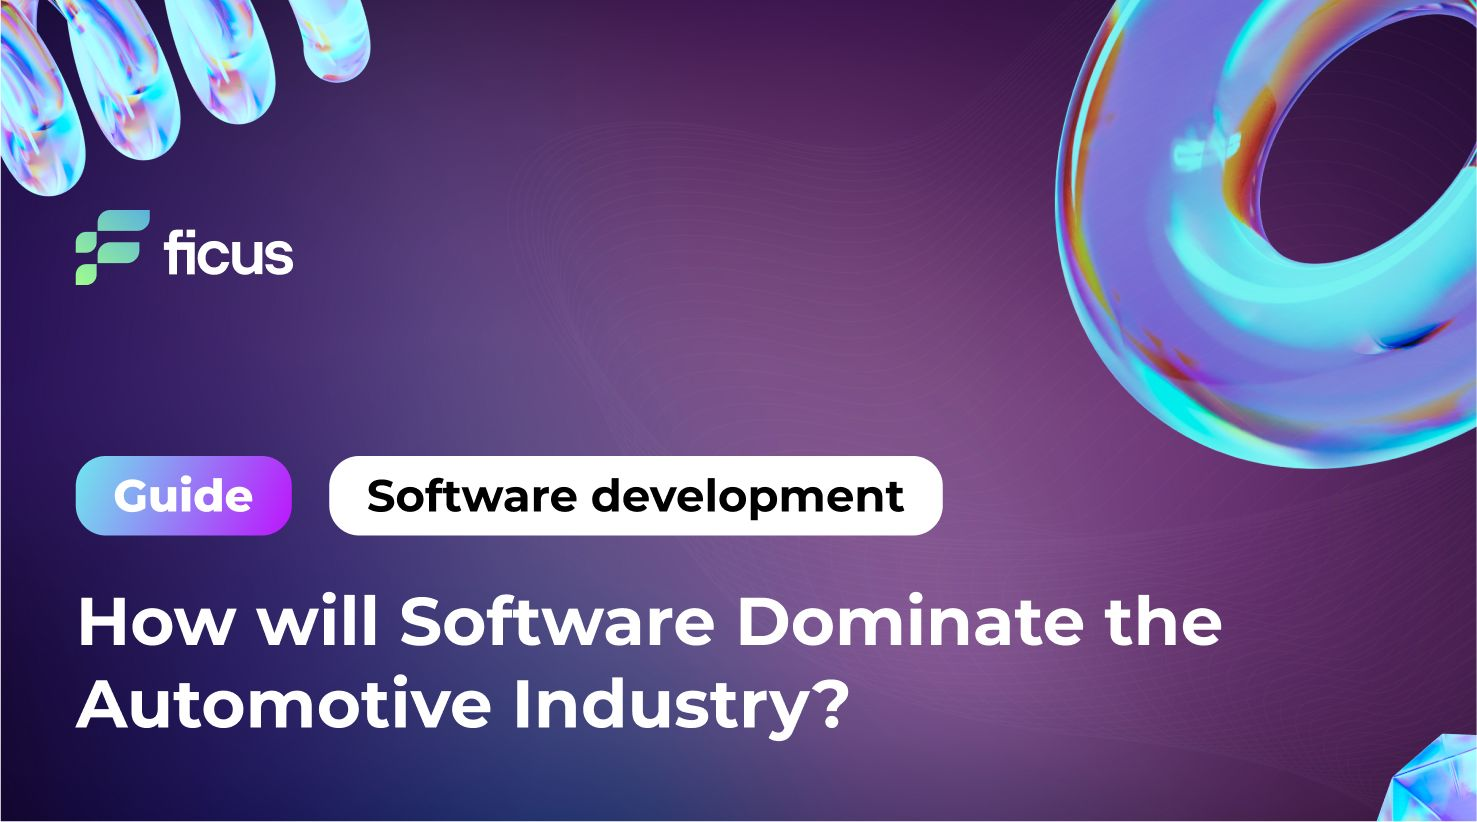 How will Software Dominate the Automotive Industry?